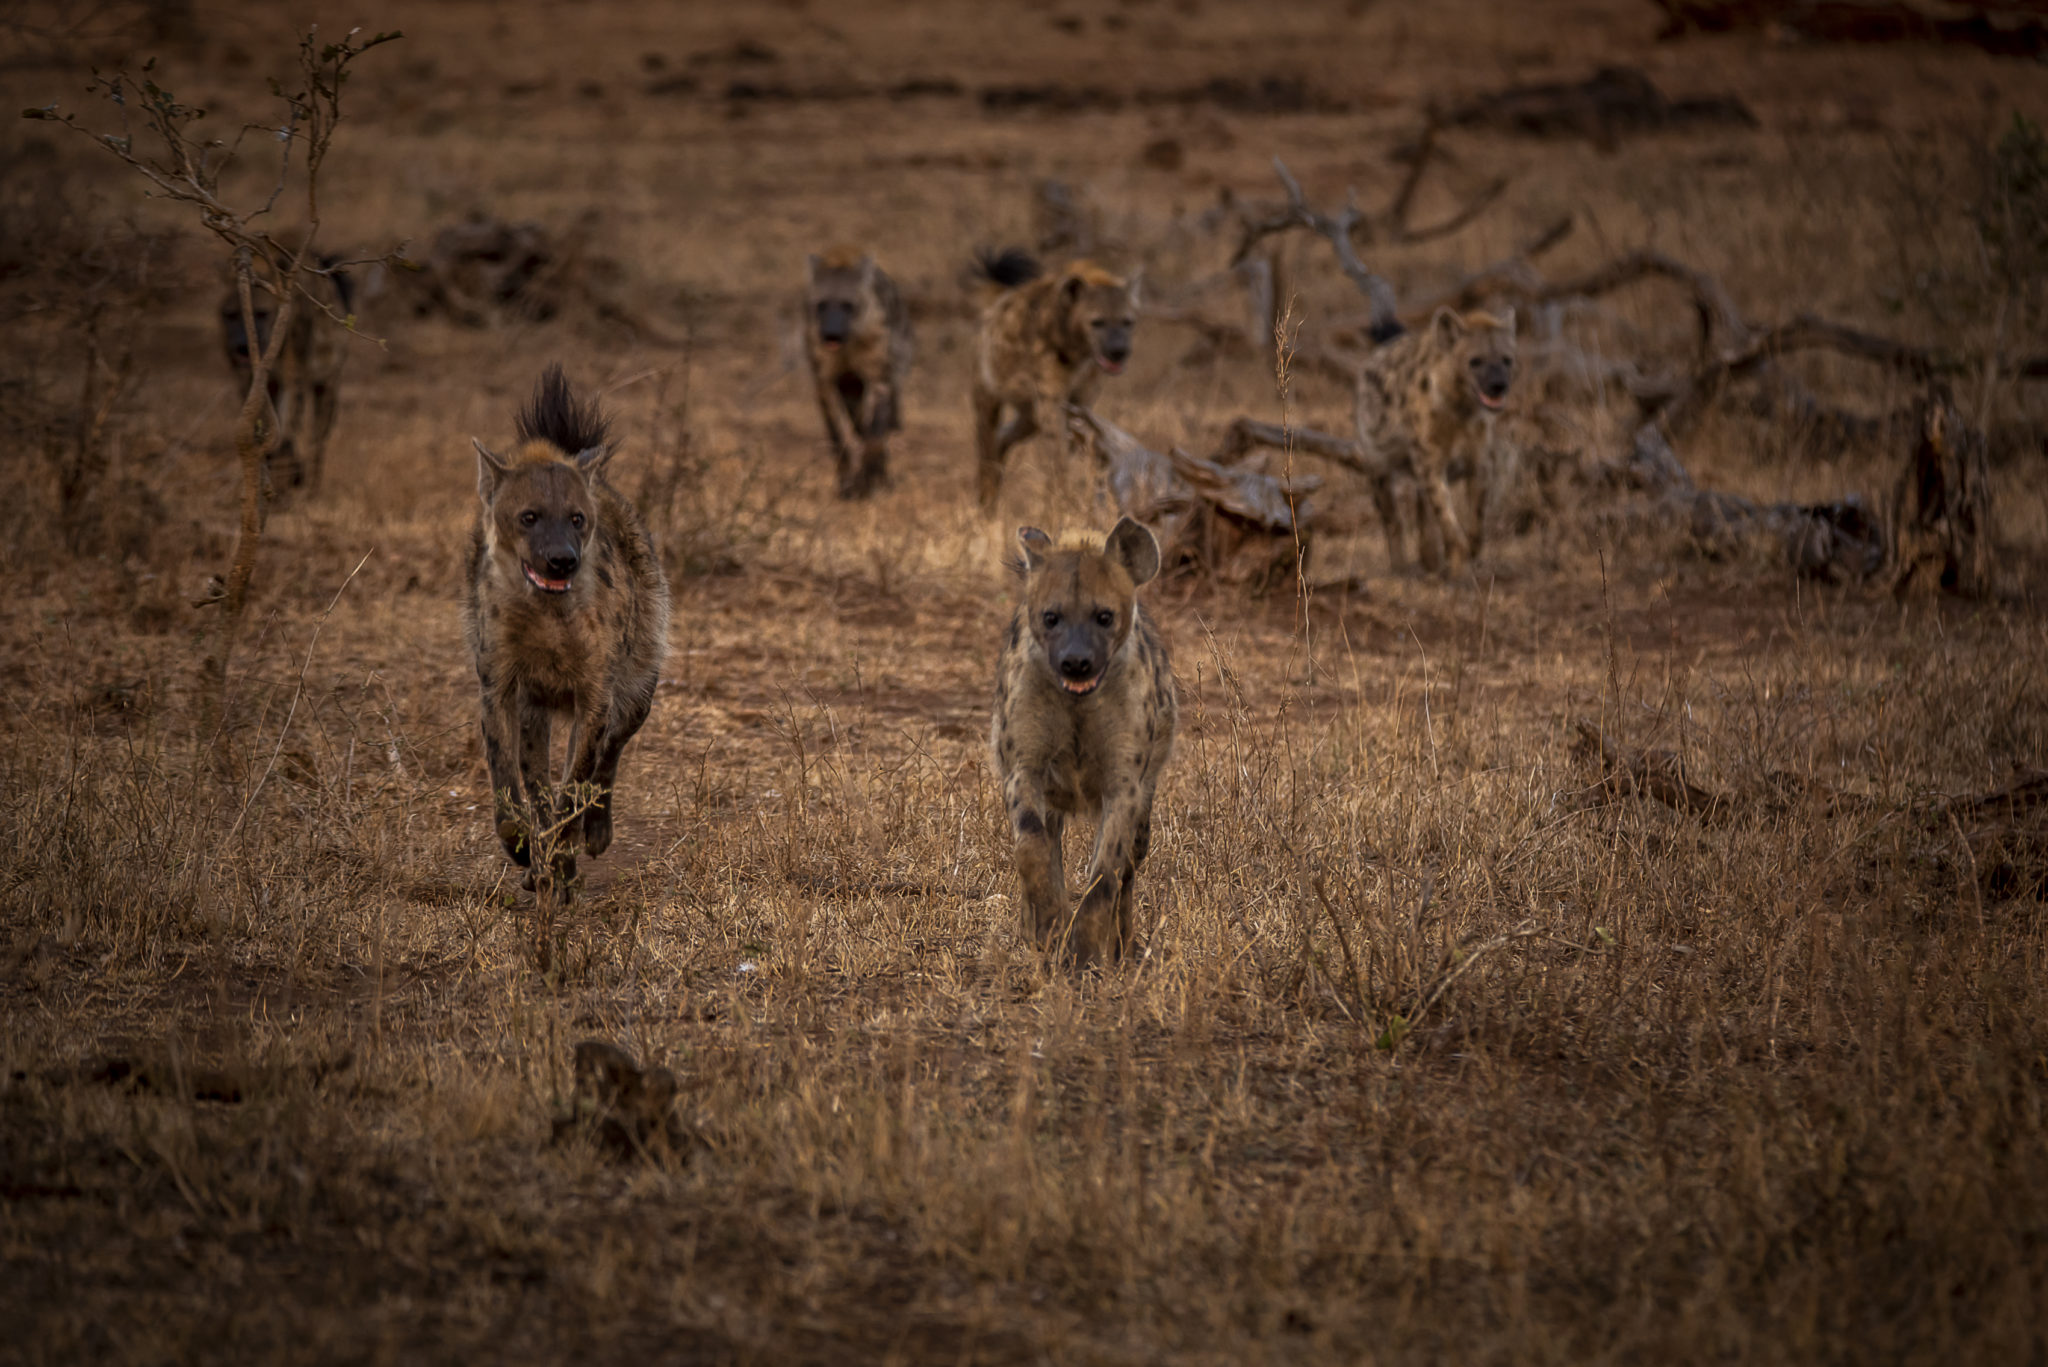 Call of the Hyena – South Africa